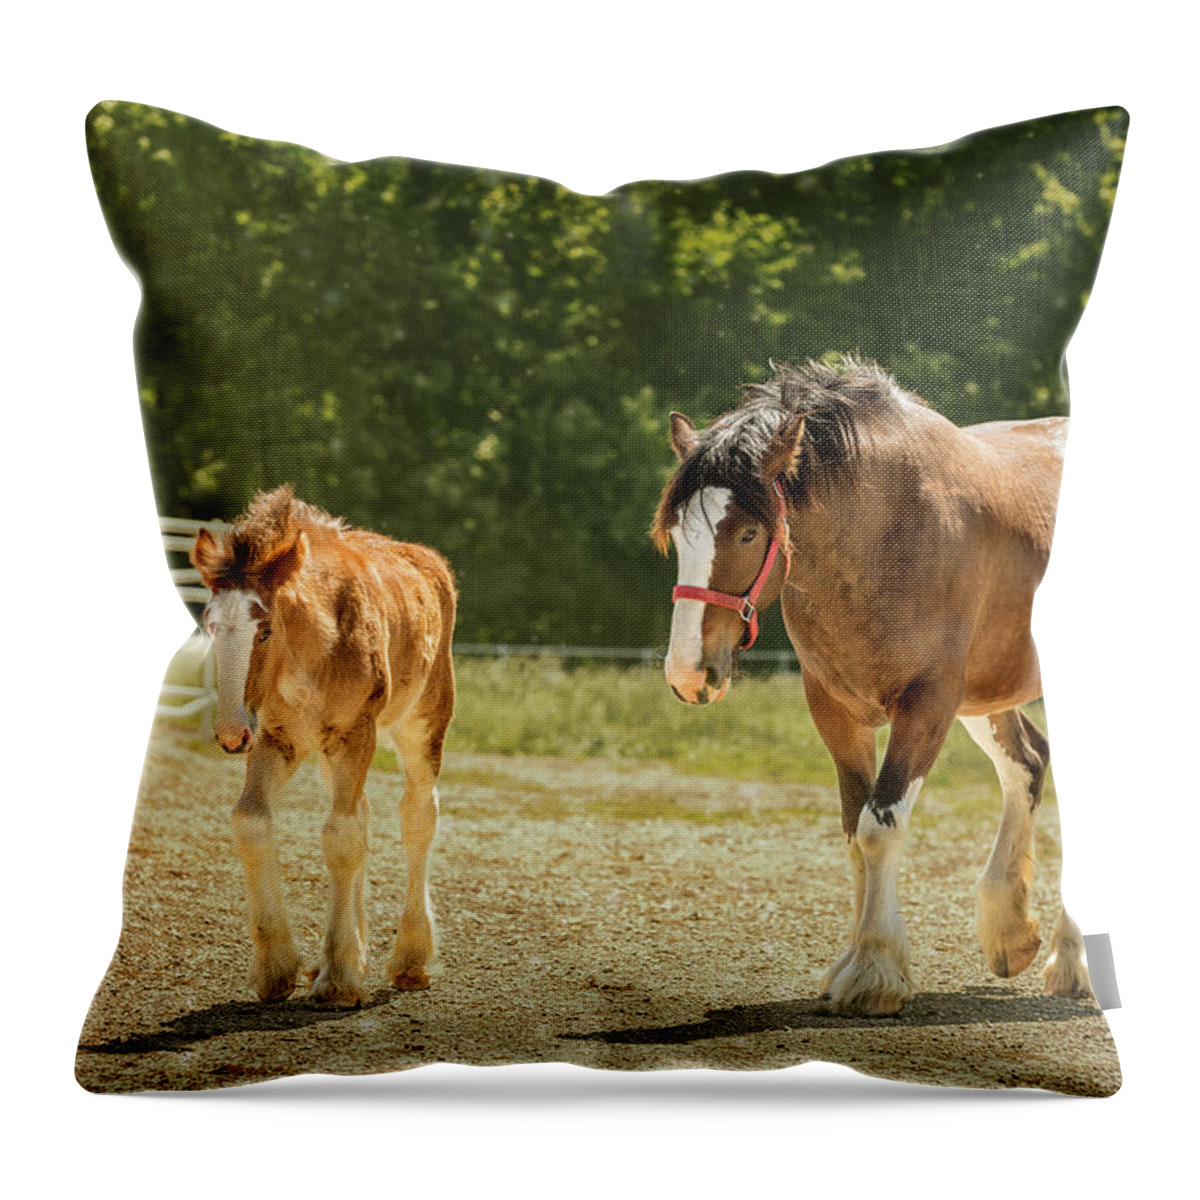 Animal Throw Pillow featuring the photograph Leading The Way by Bill and Linda Tiepelman